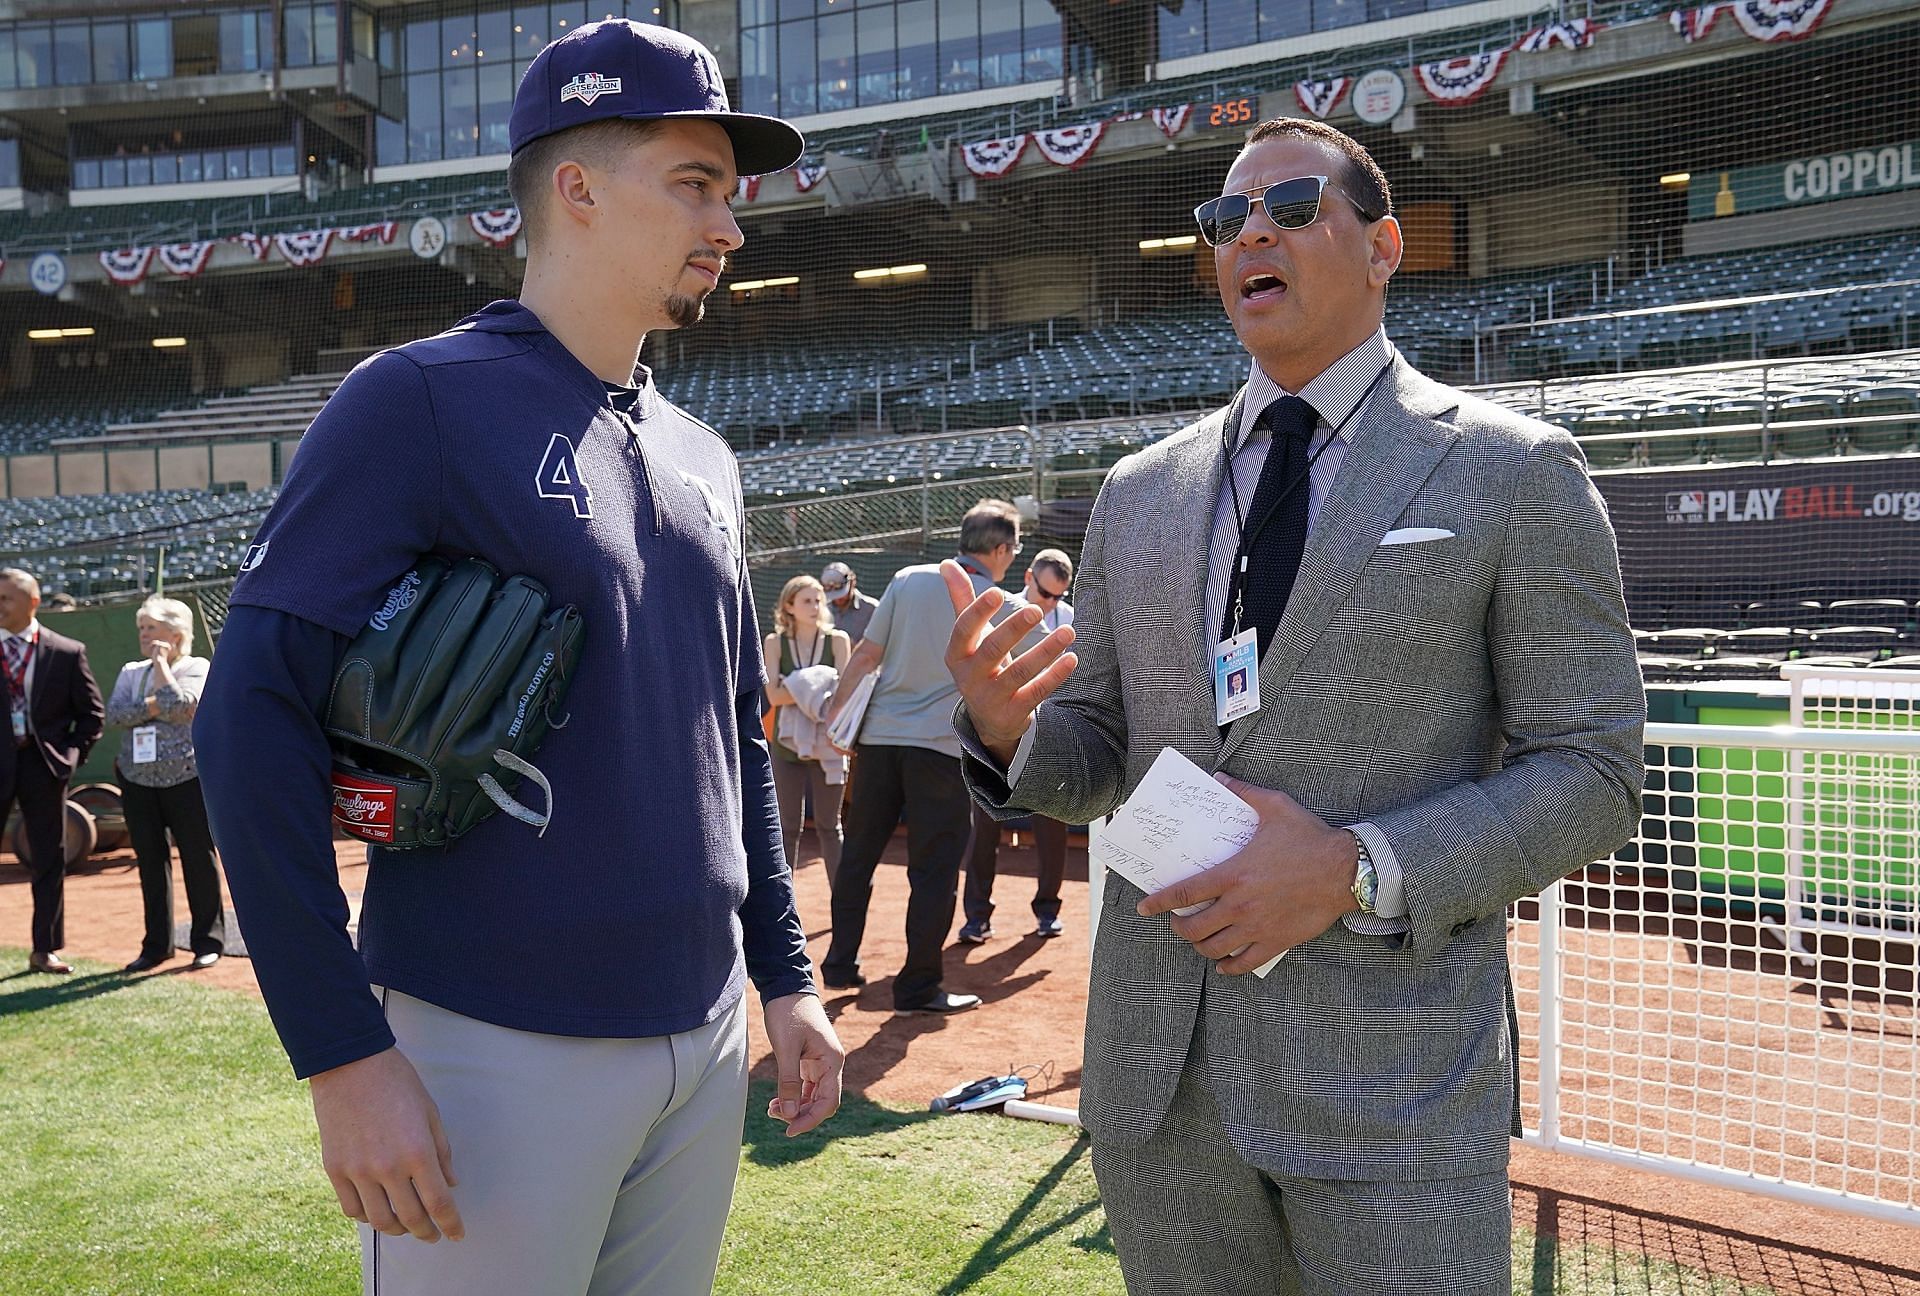 Alex Rodriguez is now the chairman of his company A-Rod Corp, which deals with real estate and media.